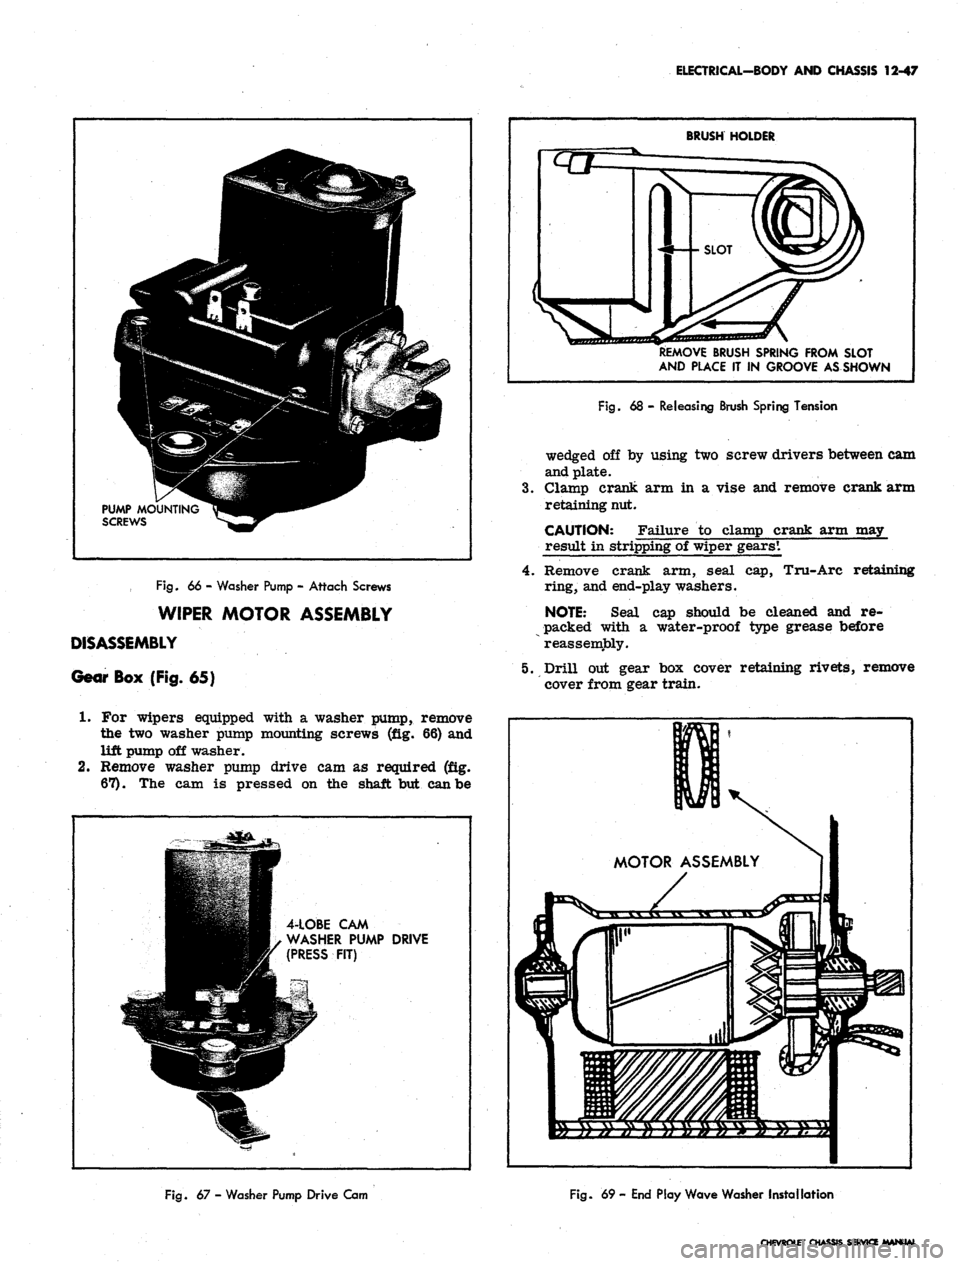 CHEVROLET CAMARO 1967 1.G Chassis Workshop Manual 
ELECTRICAL-BODY AND CHASSIS 12-47

1

1

Fig.
 66 - Washer Pump - Attach Screws

WIPER MOTOR ASSEMBLY

DISASSEMBLY

Gear Box (Fig. 65}

1.
 For wipers equipped with a washer pump, remove

the two was